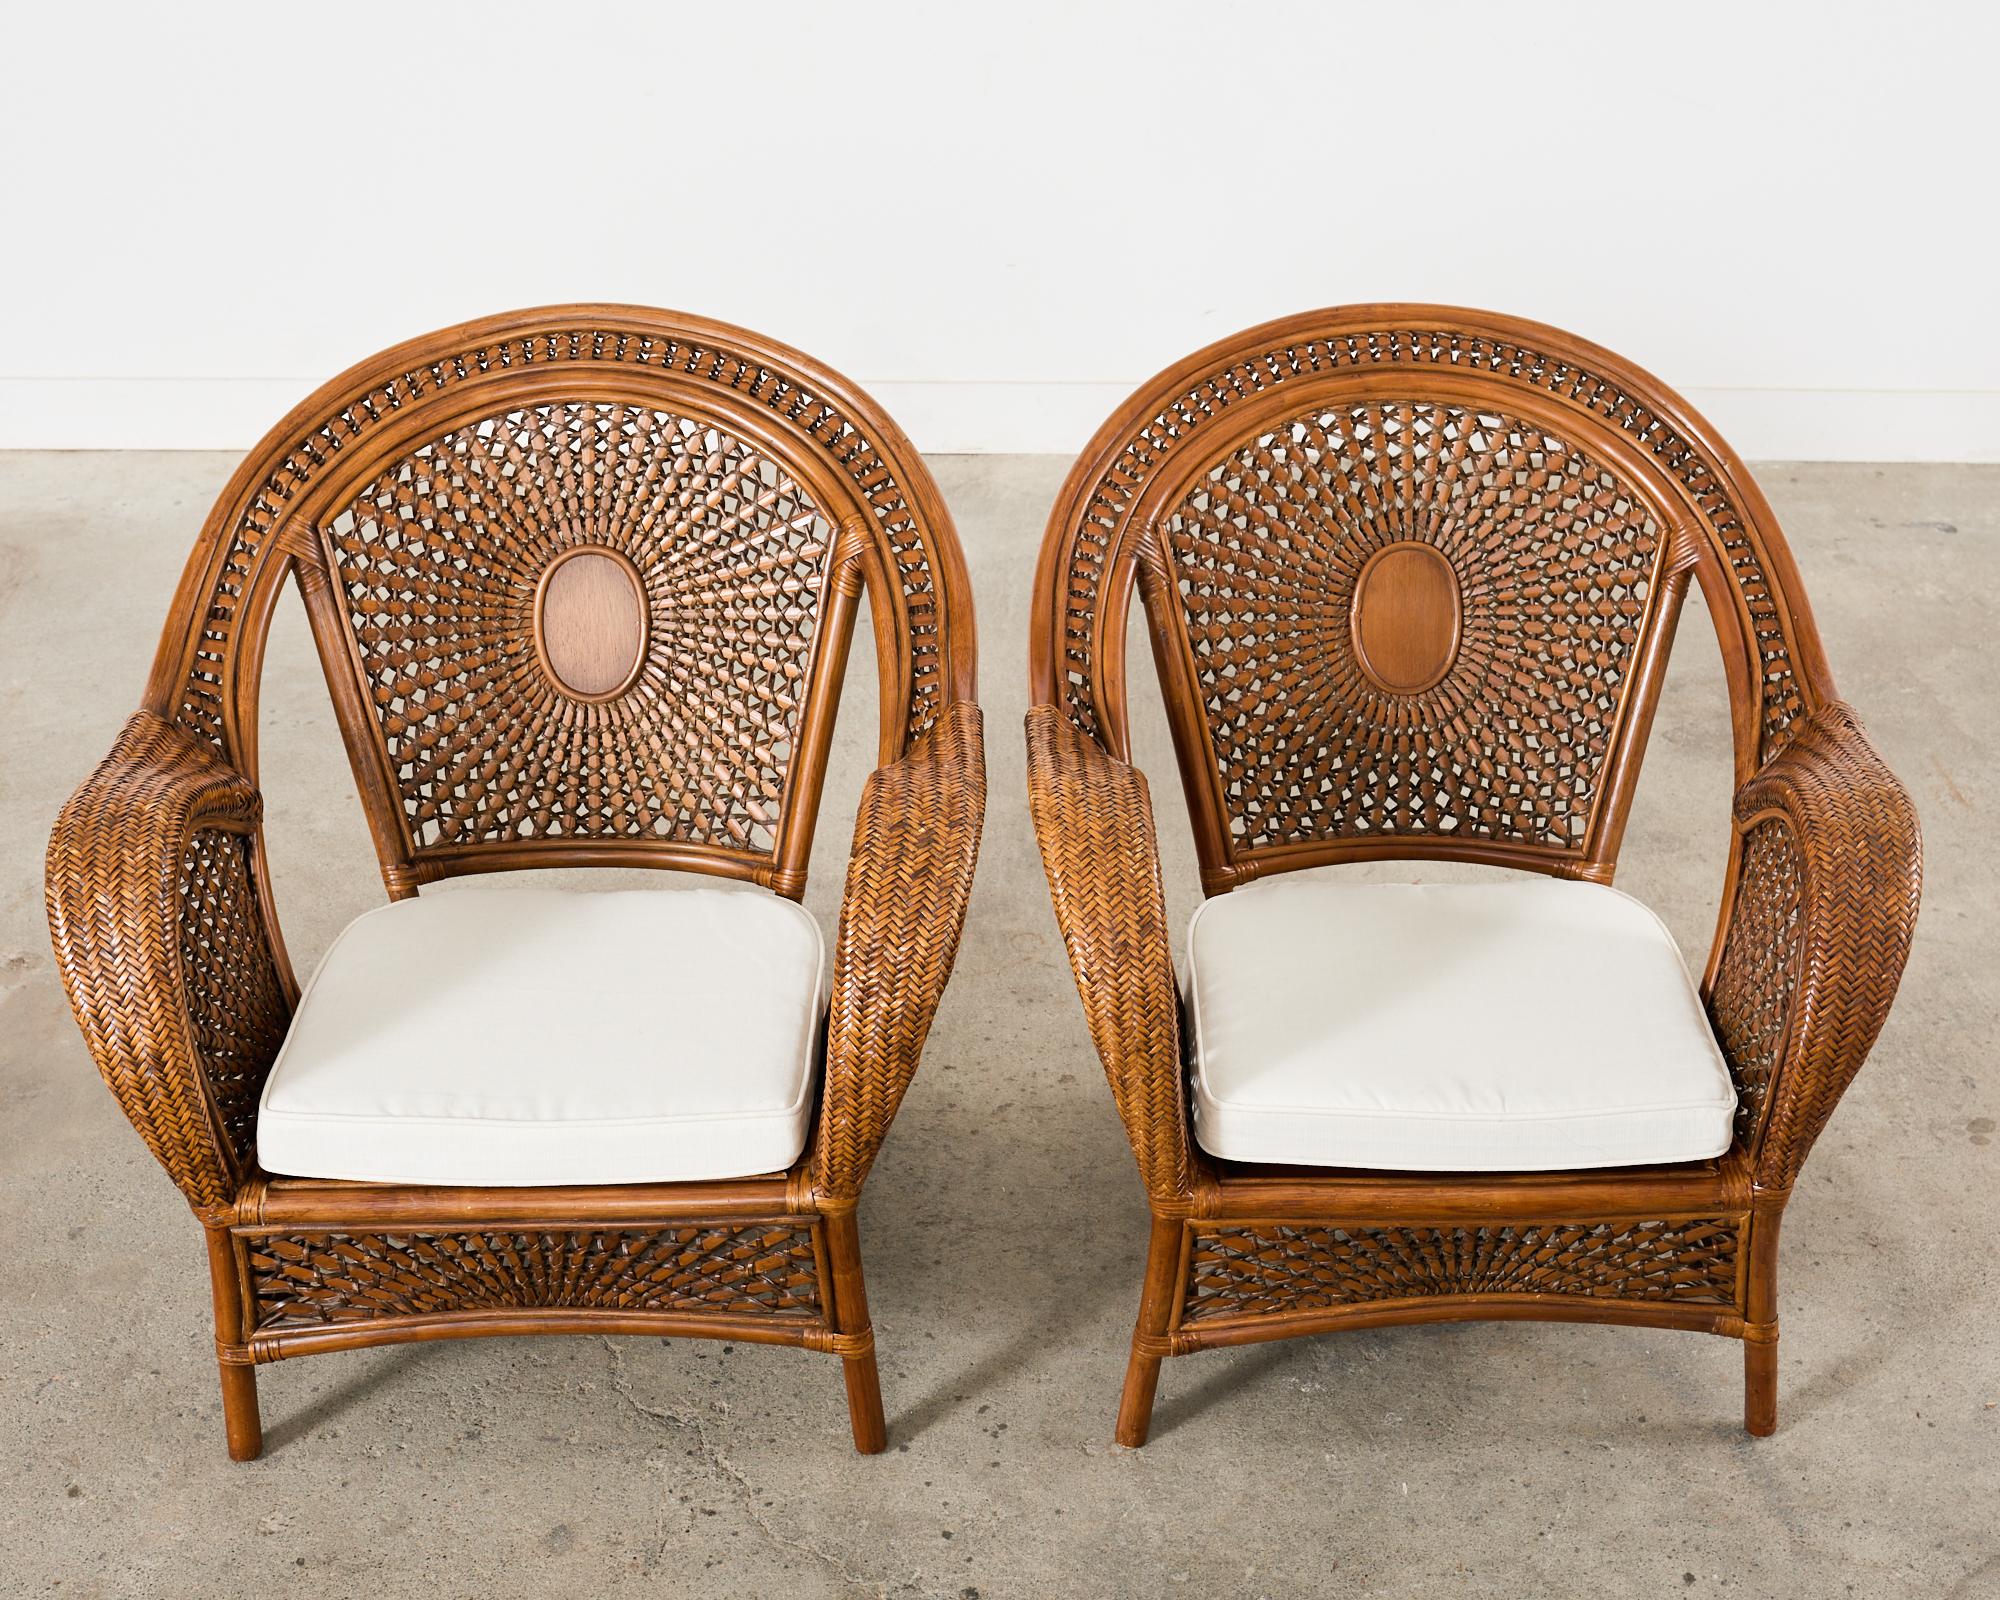 20th Century Pair of Bohemian Peacock Style Rattan Wicker Lounge Chairs